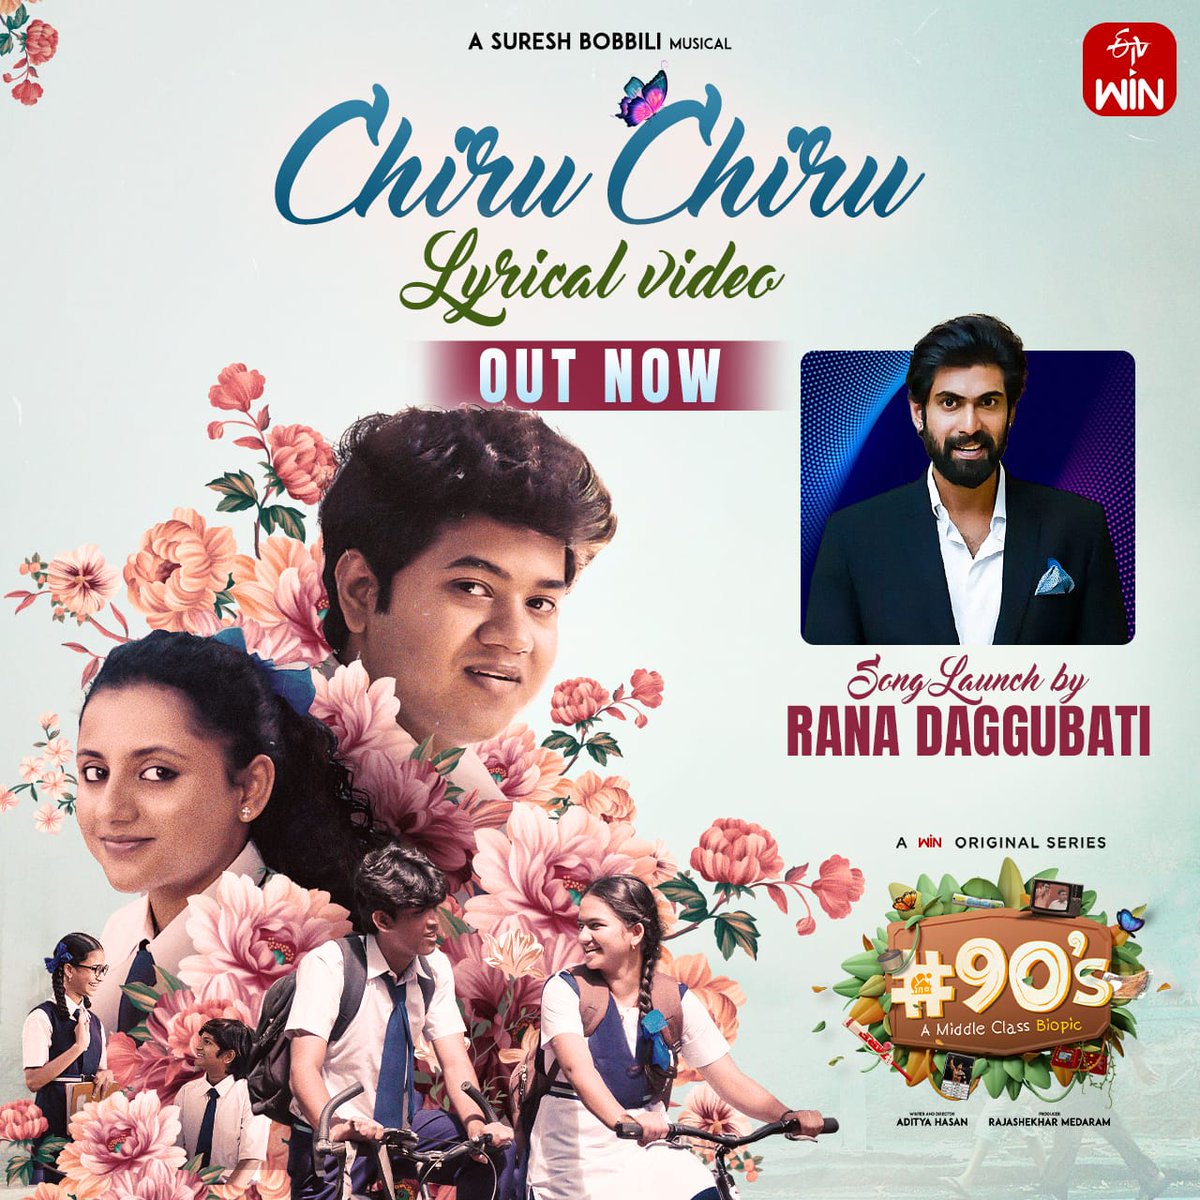 Embark on a journey down memory lane with CHIRU CHIRU from the webseries #90’s - A Middle Class Biopic 🎶 ✨ ▶️ youtu.be/eDxRI6tkfNU A nostalgic melody from @sureshbobbili9 Premieres on Jan 5th on @etvwin